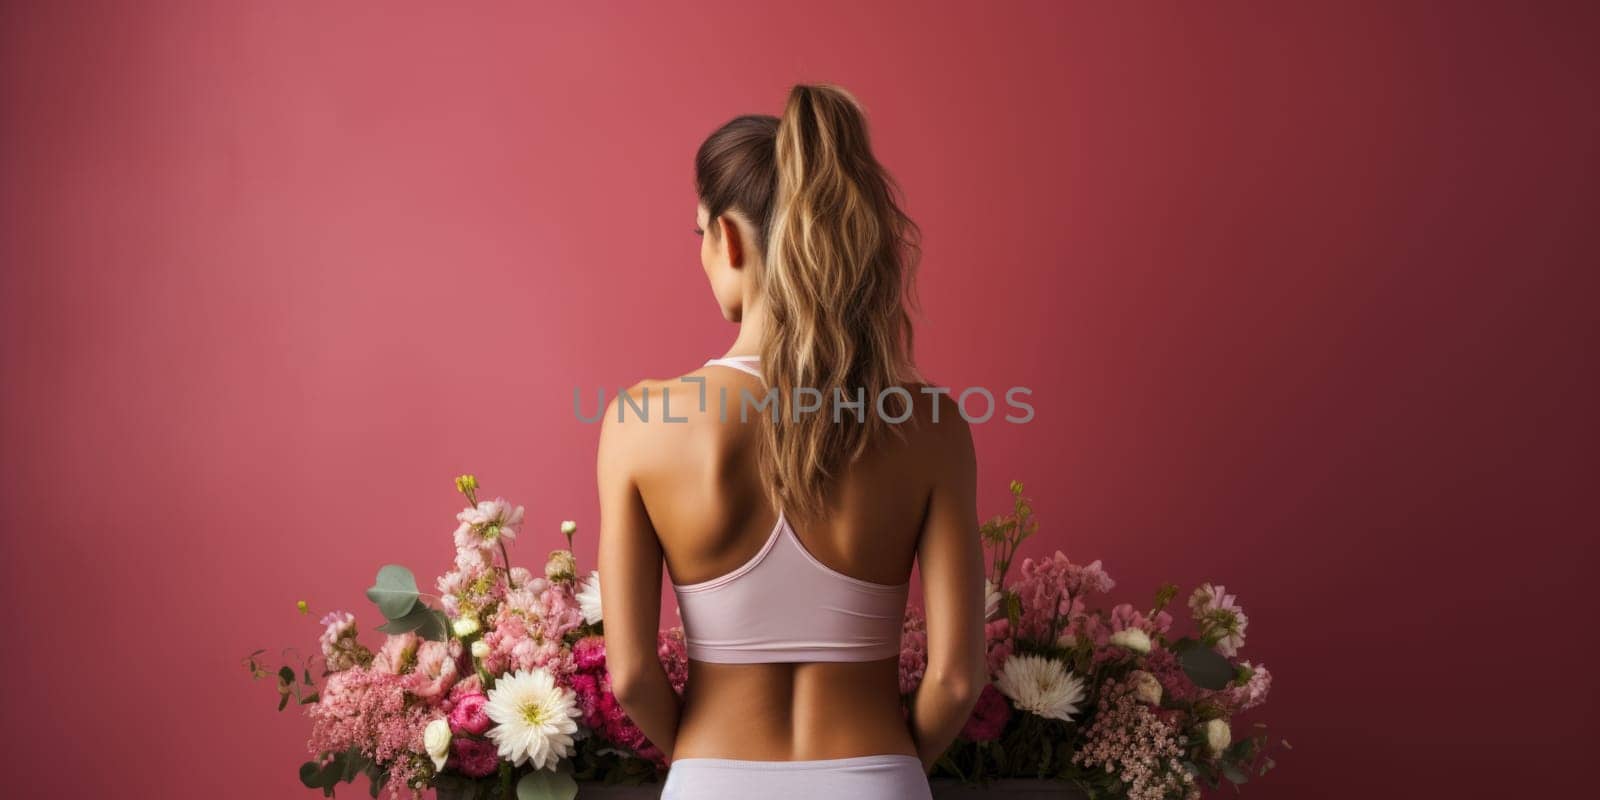 Woman Standing Beside Vase of Flowers by but_photo